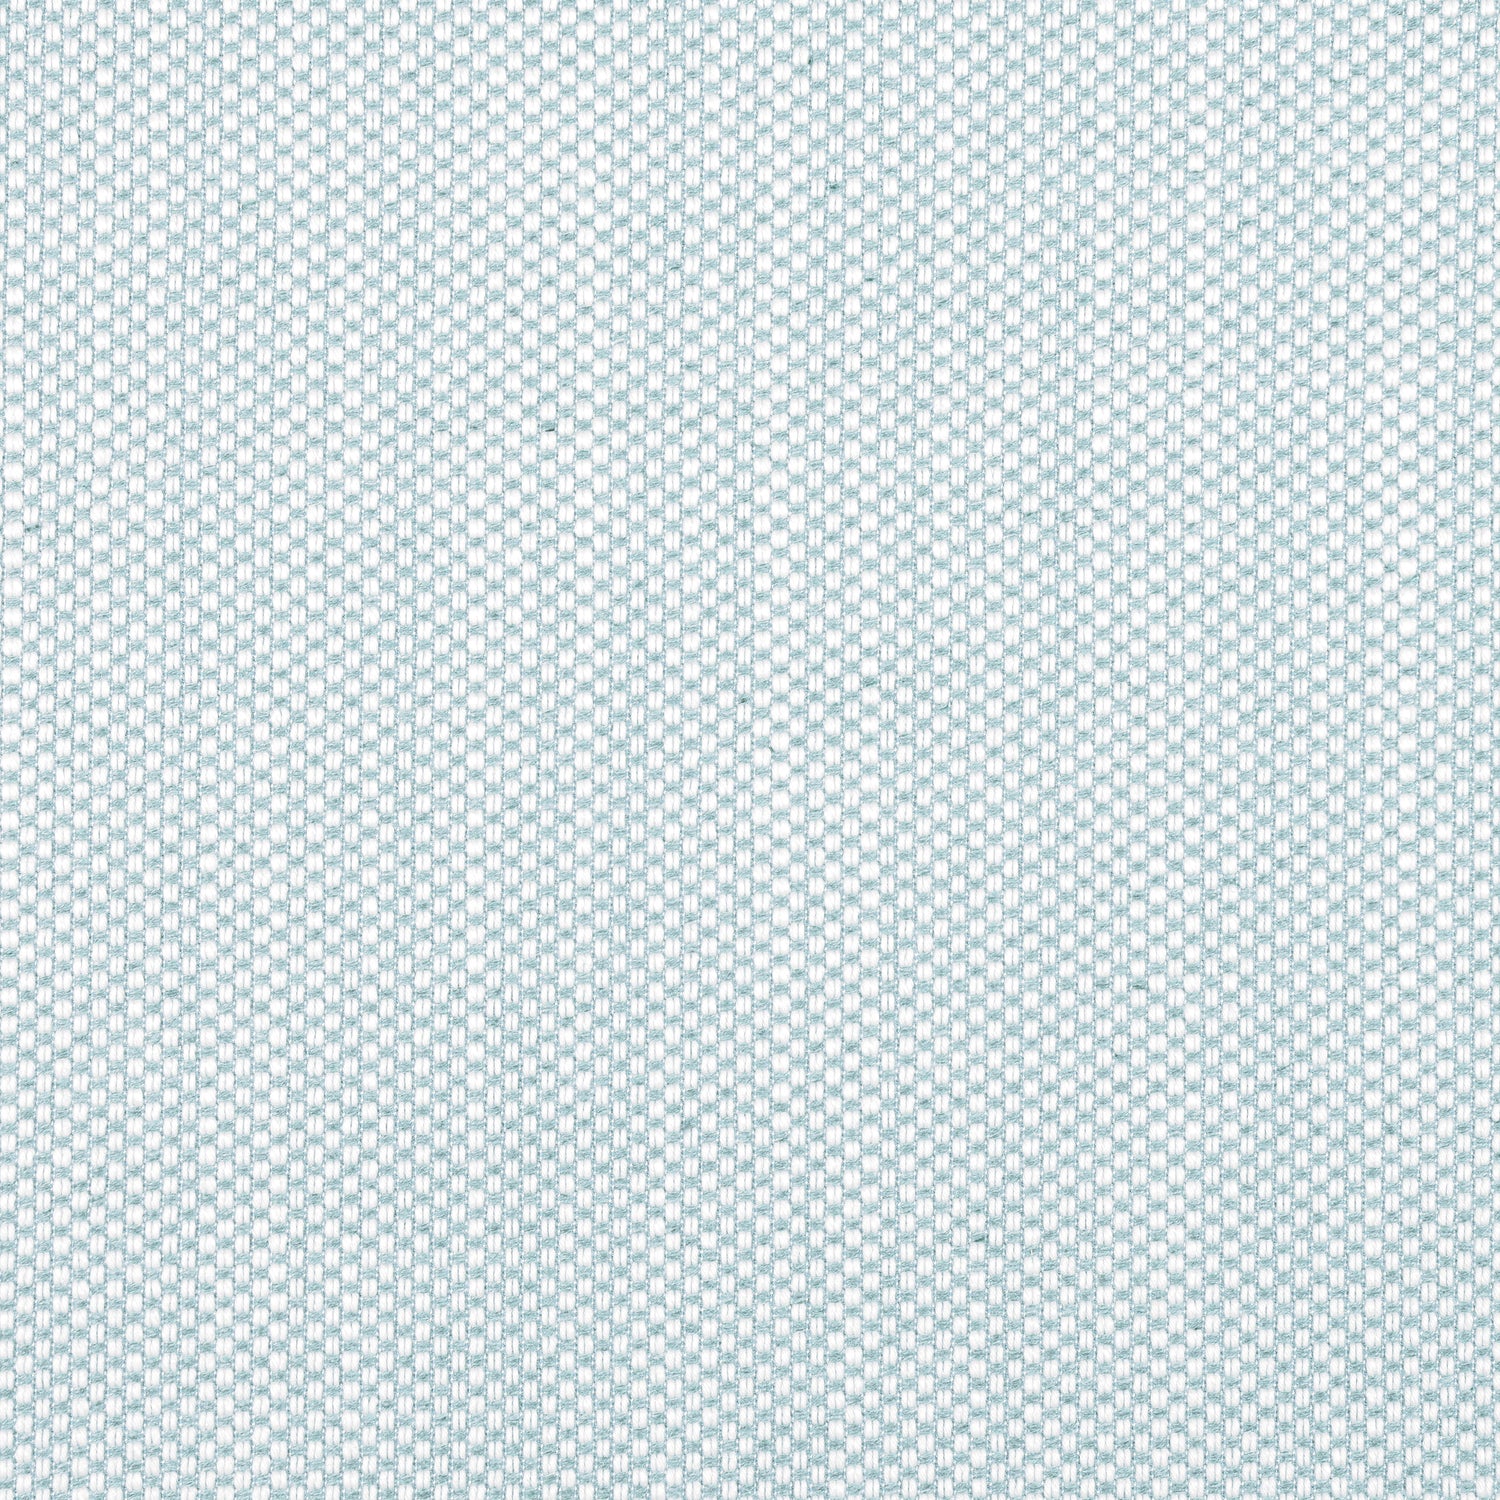 Ravenna fabric in seafoam color - pattern number W8618 - by Thibaut in the Villa Textures collection